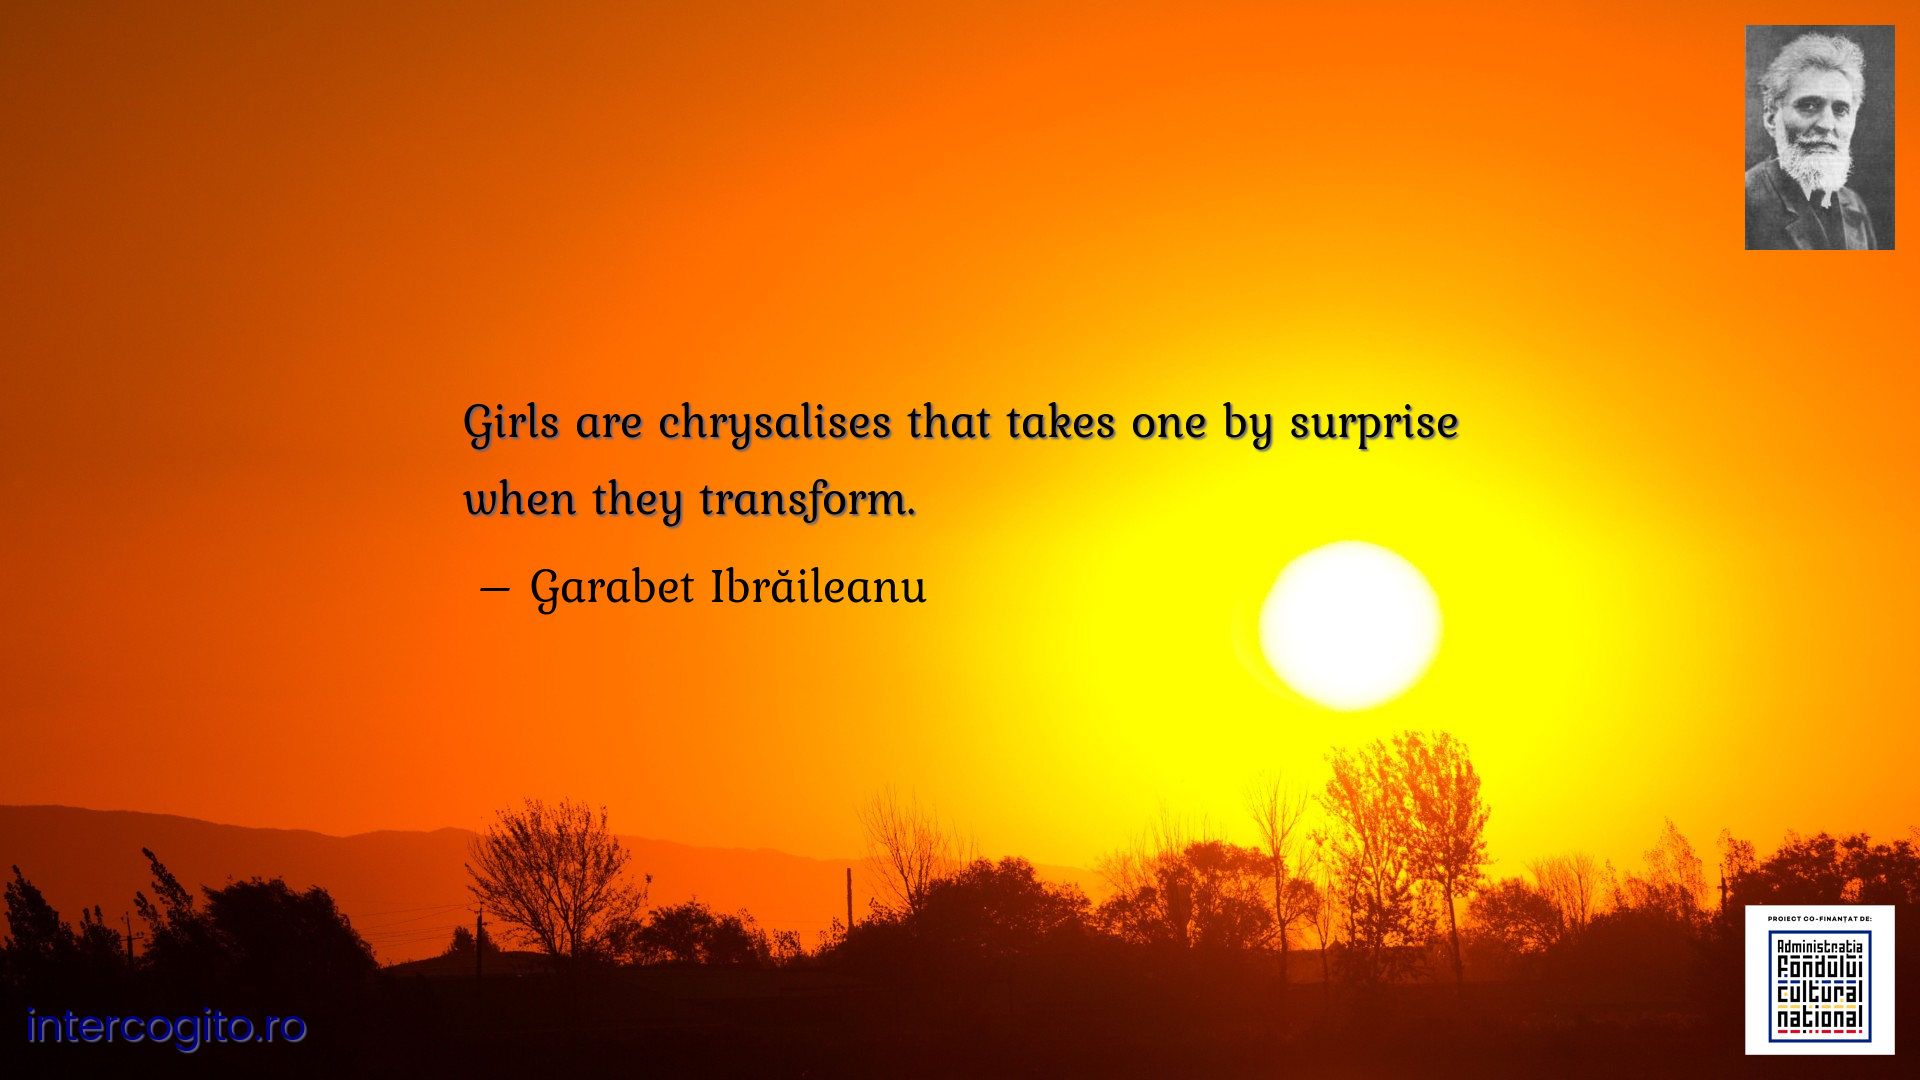 Girls are chrysalises that takes one by surprise when they transform.